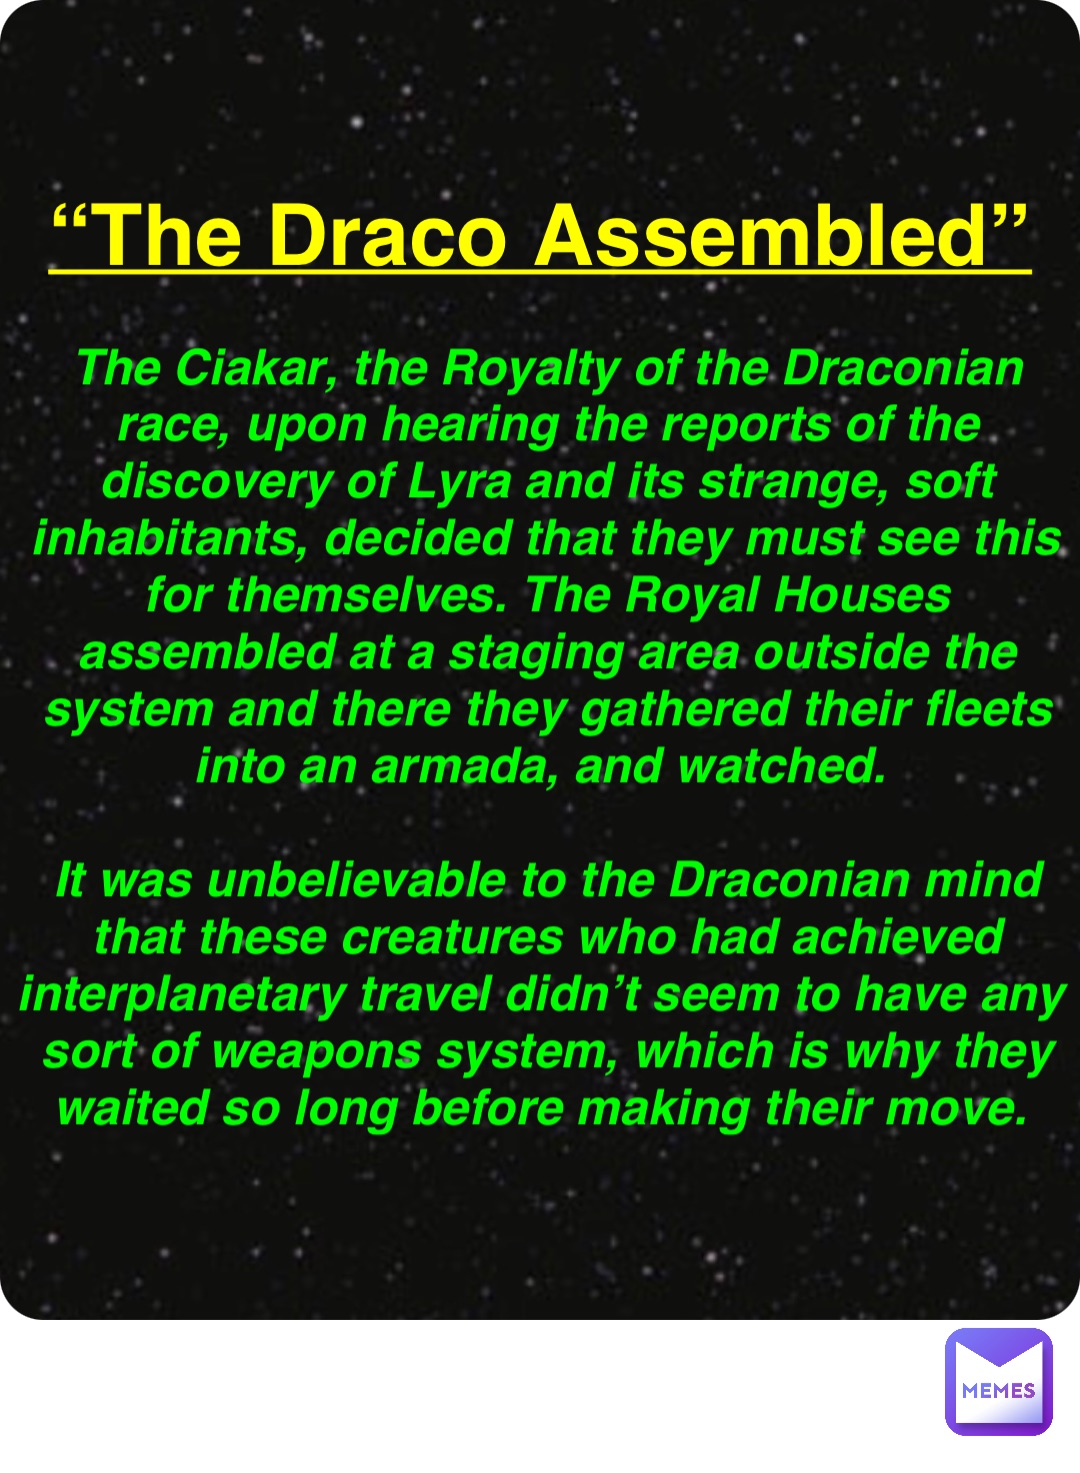 Double tap to edit “The Draco Assembled” The Ciakar, the Royalty of the Draconian race, upon hearing the reports of the discovery of Lyra and its strange, soft inhabitants, decided that they must see this for themselves. The Royal Houses assembled at a staging area outside the system and there they gathered their fleets into an armada, and watched.

It was unbelievable to the Draconian mind that these creatures who had achieved interplanetary travel didn’t seem to have any sort of weapons system, which is why they waited so long before making their move.